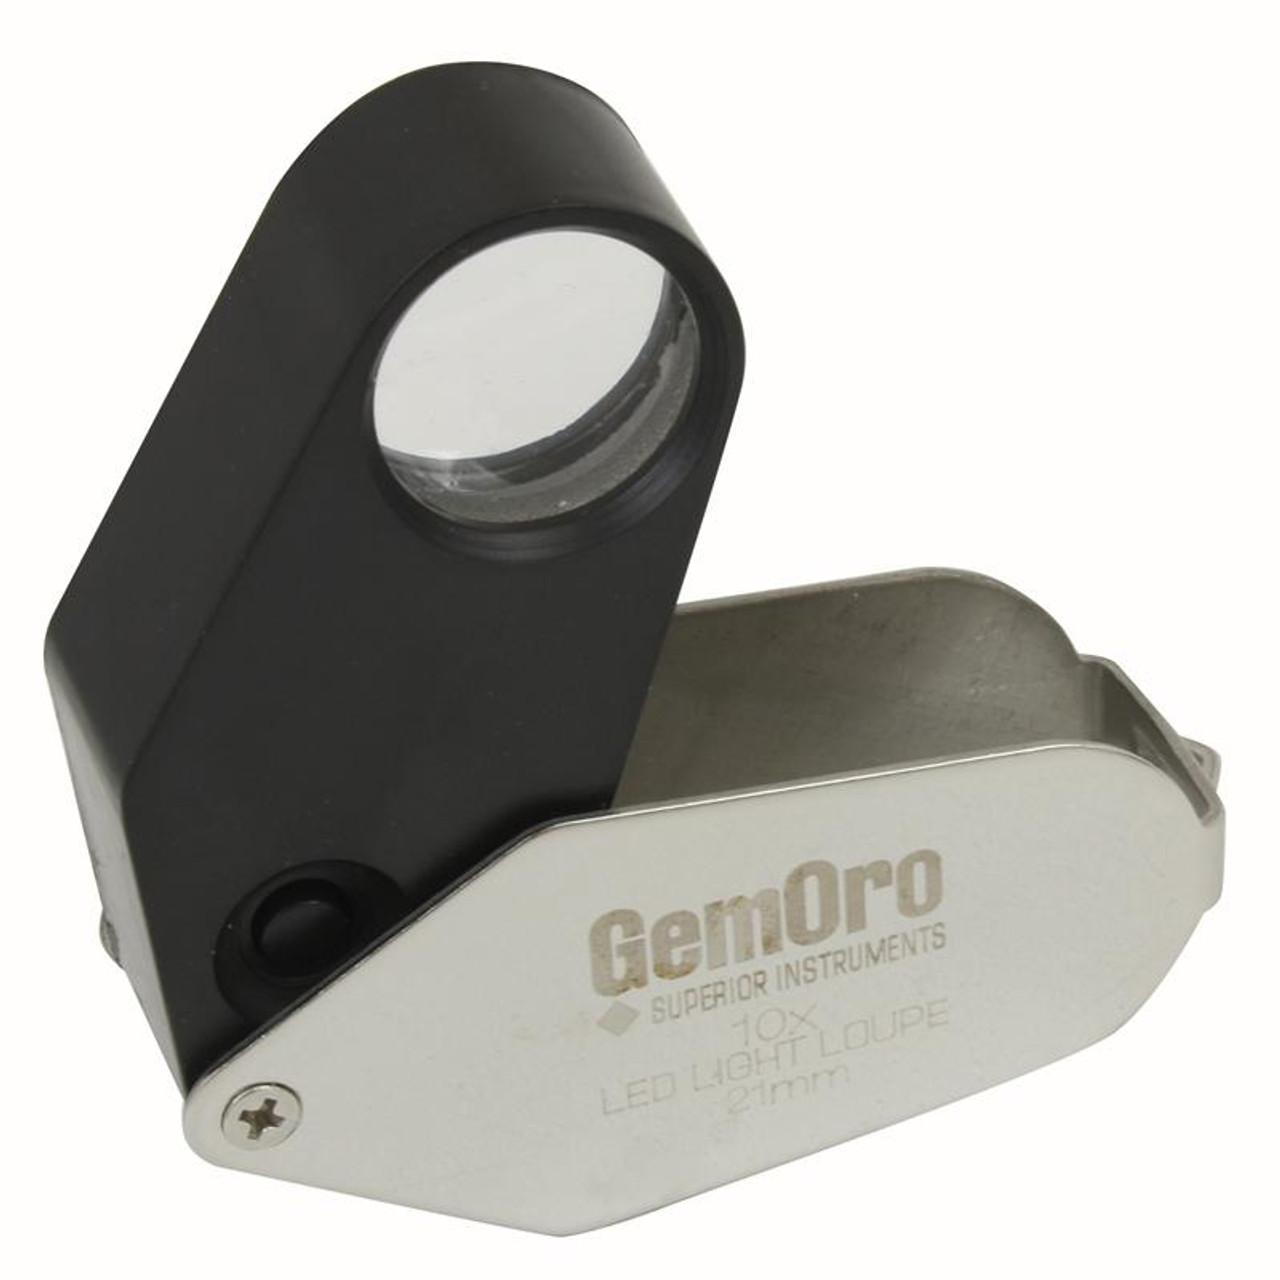 GemOro LED Light Loupe 10x 21mm - Magnifiers and Loupes